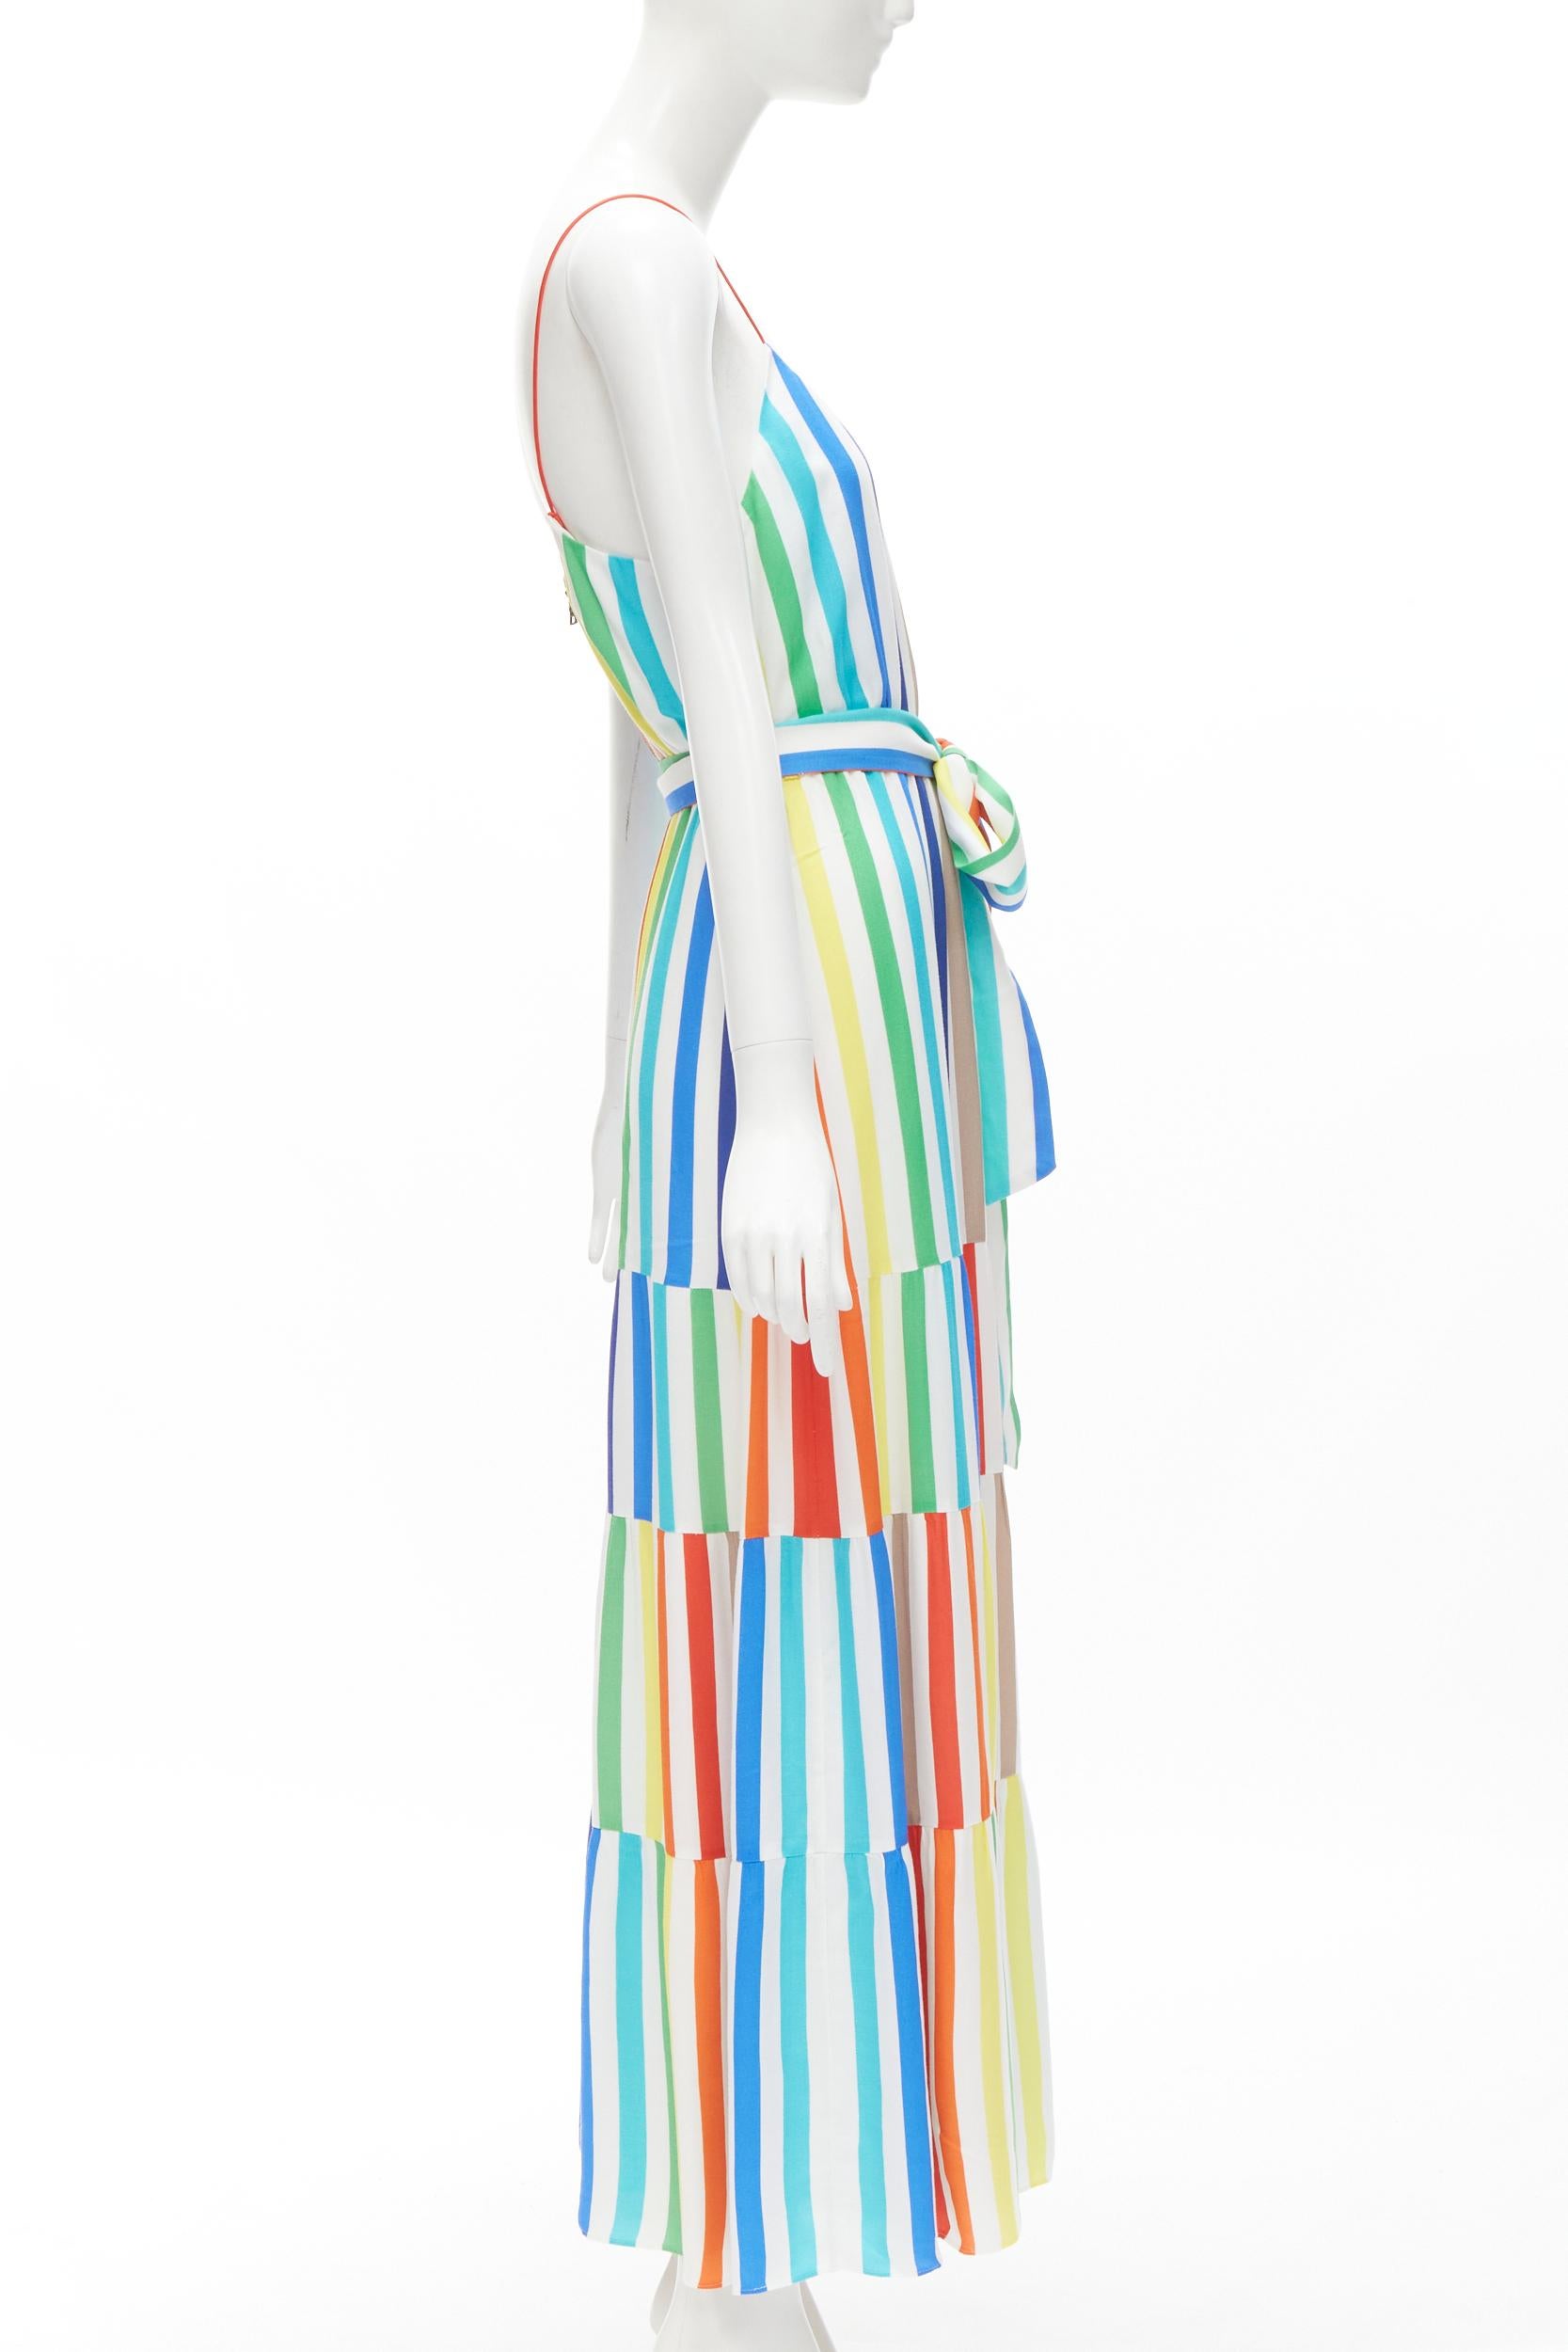 Gray ALICE OLIVIA rainbow striped belted midi dress US4 For Sale